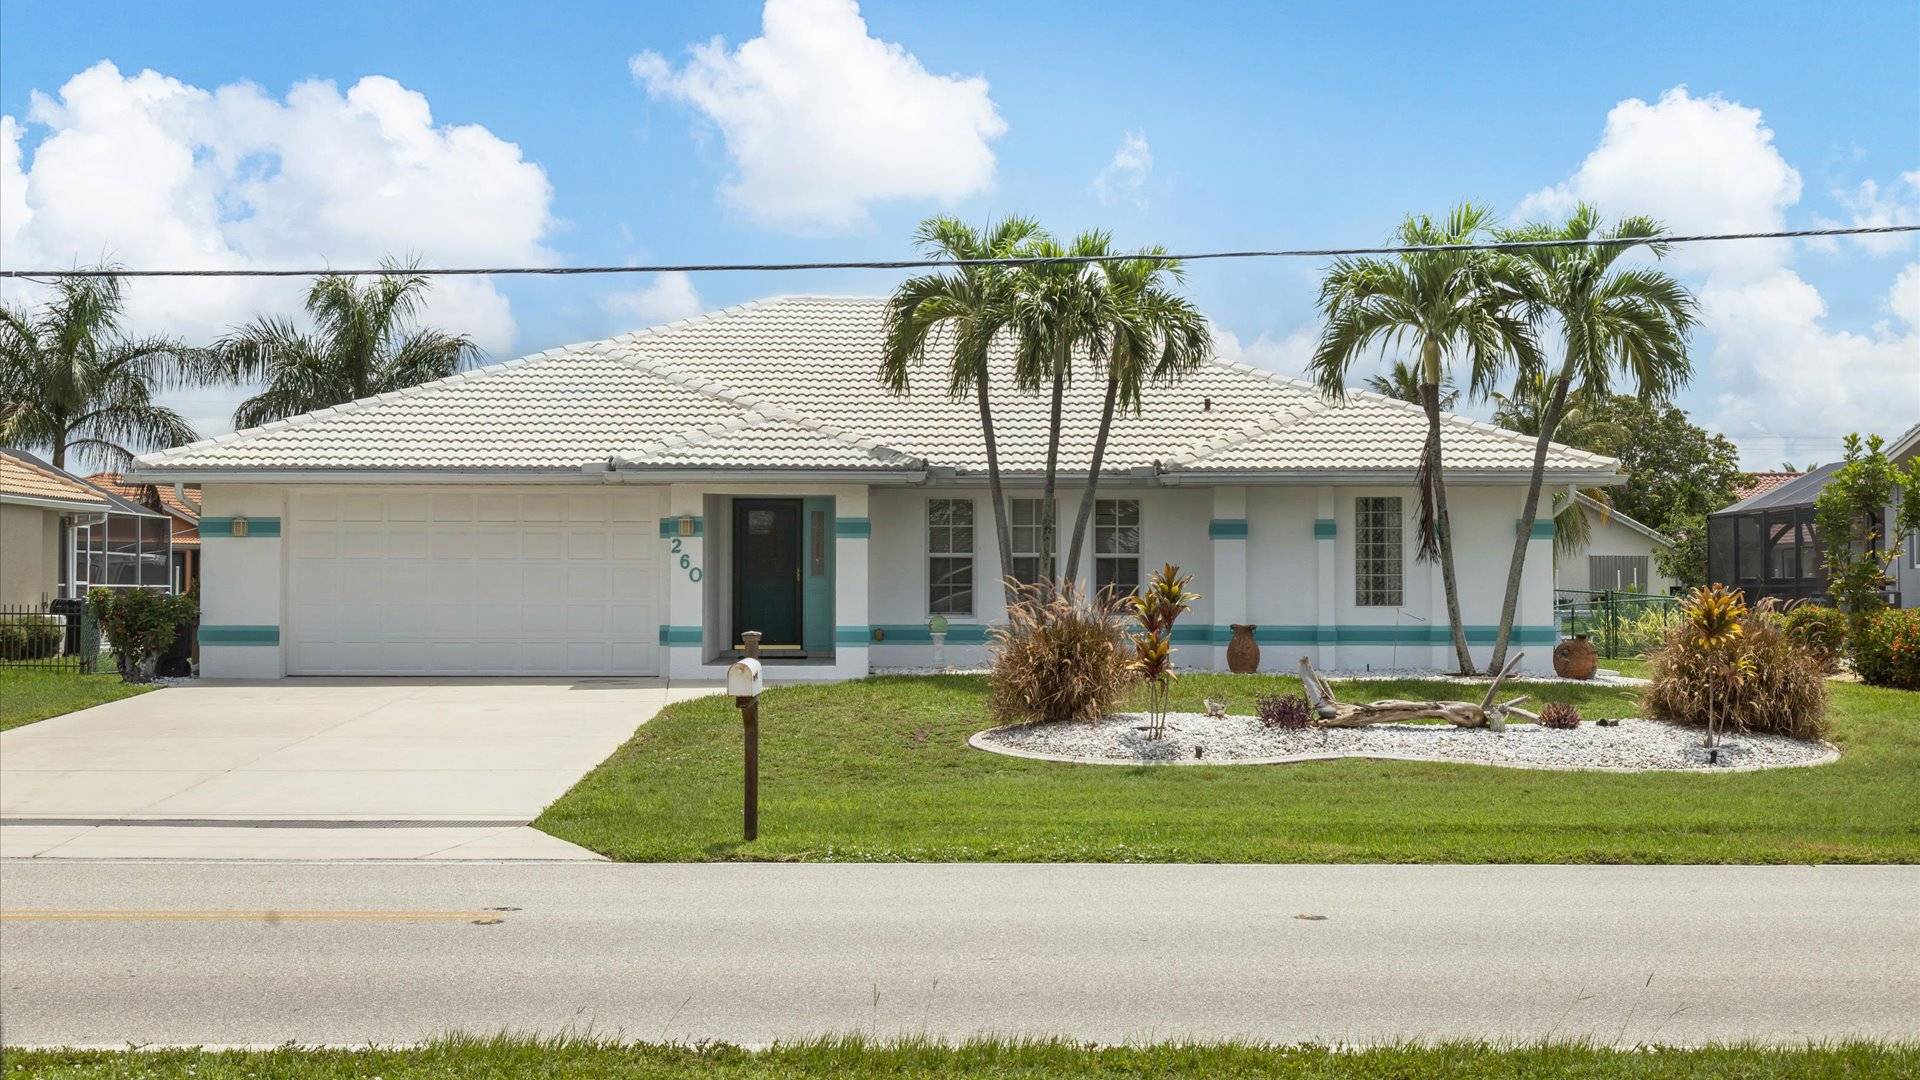 Lovely private pool/canalfront home in the popular Punta Gorda Isles community